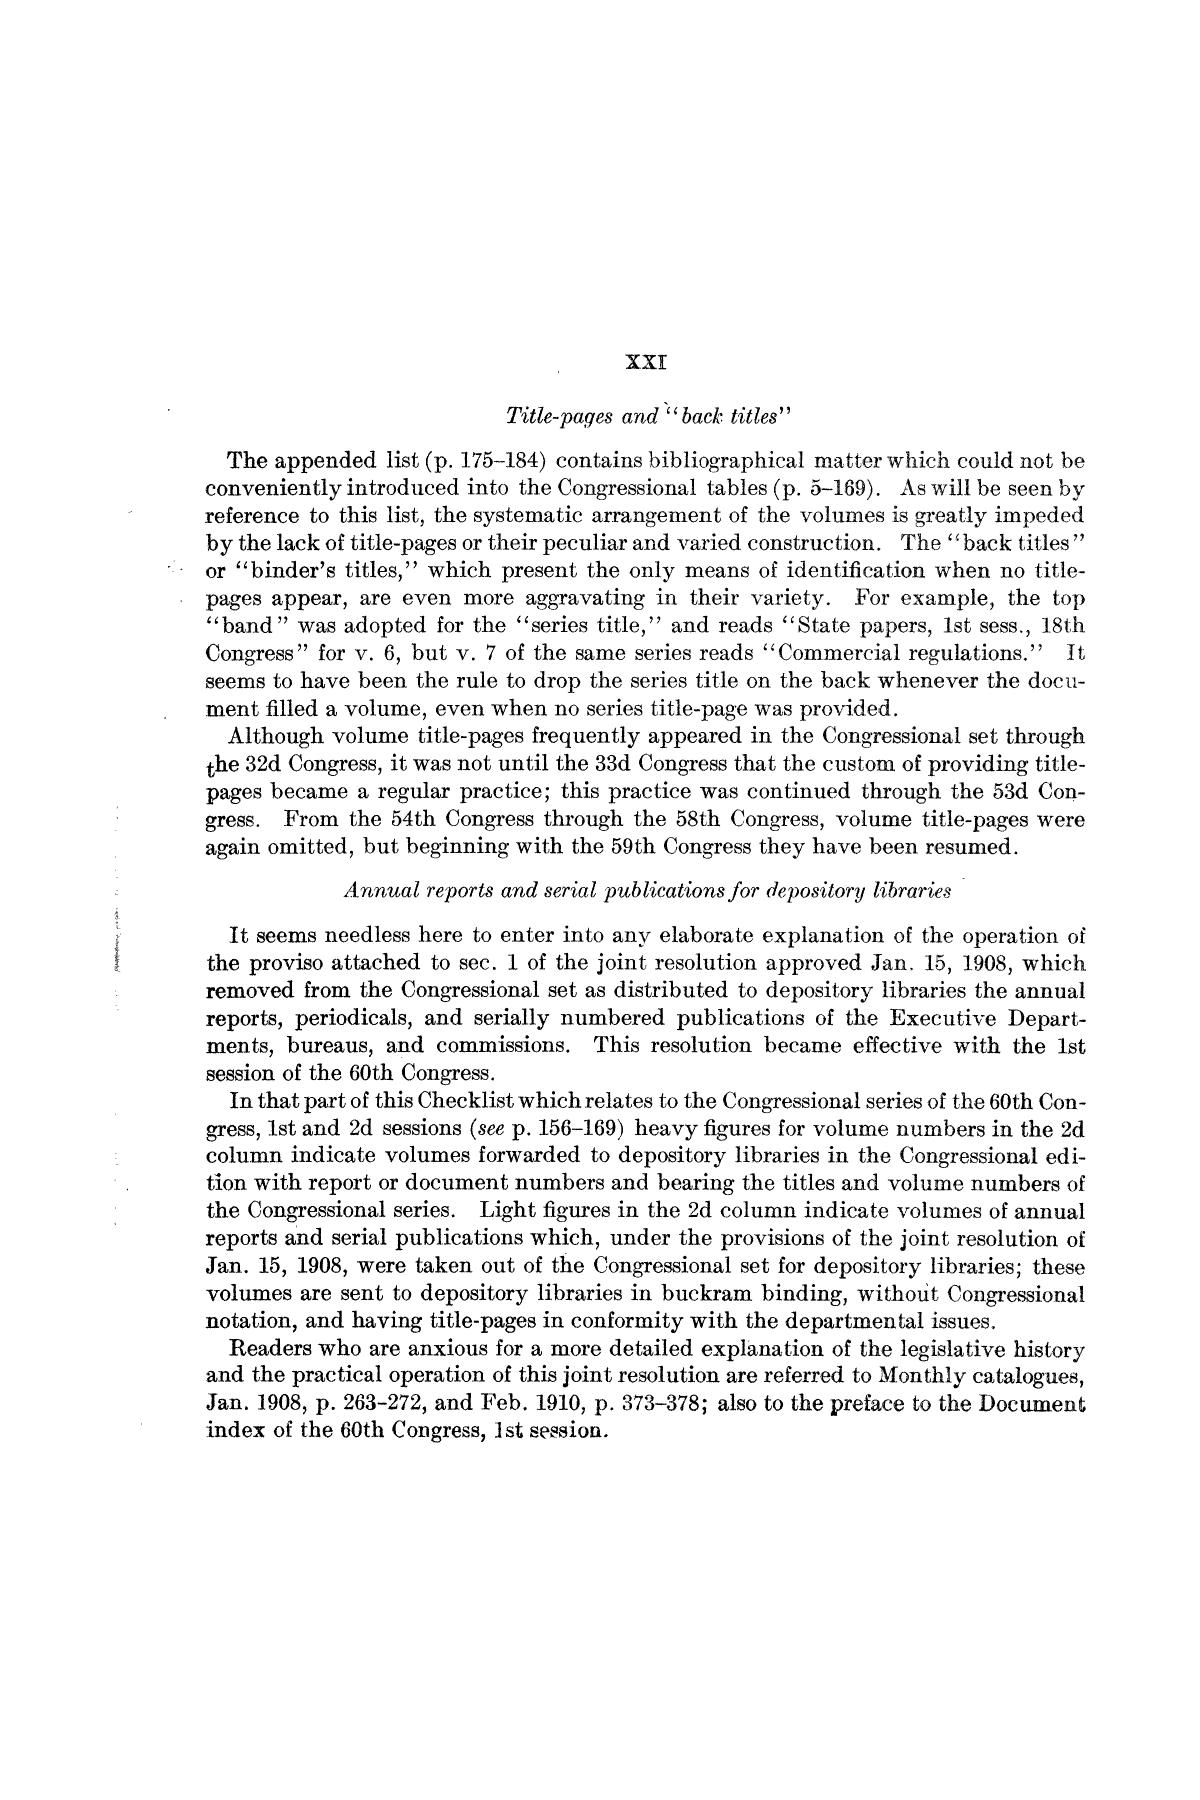 Checklist of United States Public Documents, 1789-1909, Third Edition Revised and Enlarged, Volume 1, Lists of Congressional and Departmental Publications
                                                
                                                    XXI
                                                